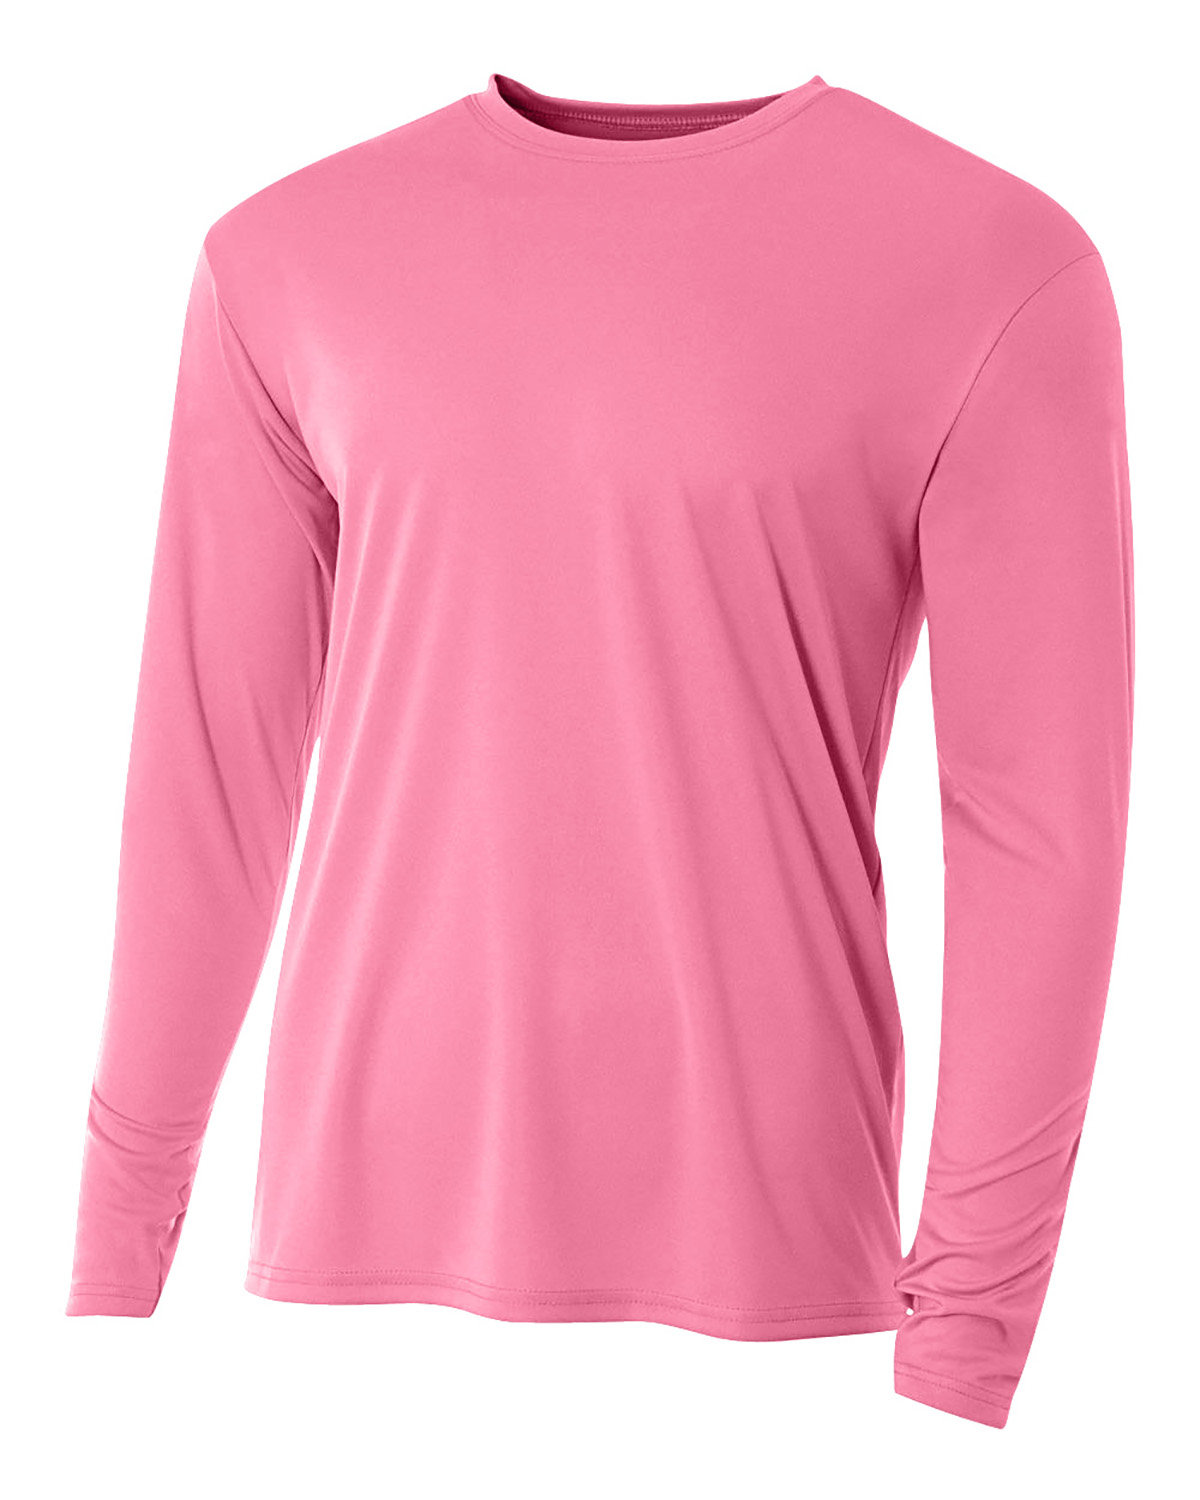 A4 Youth Long Sleeve Cooling Performance Crew Shirt PINK 